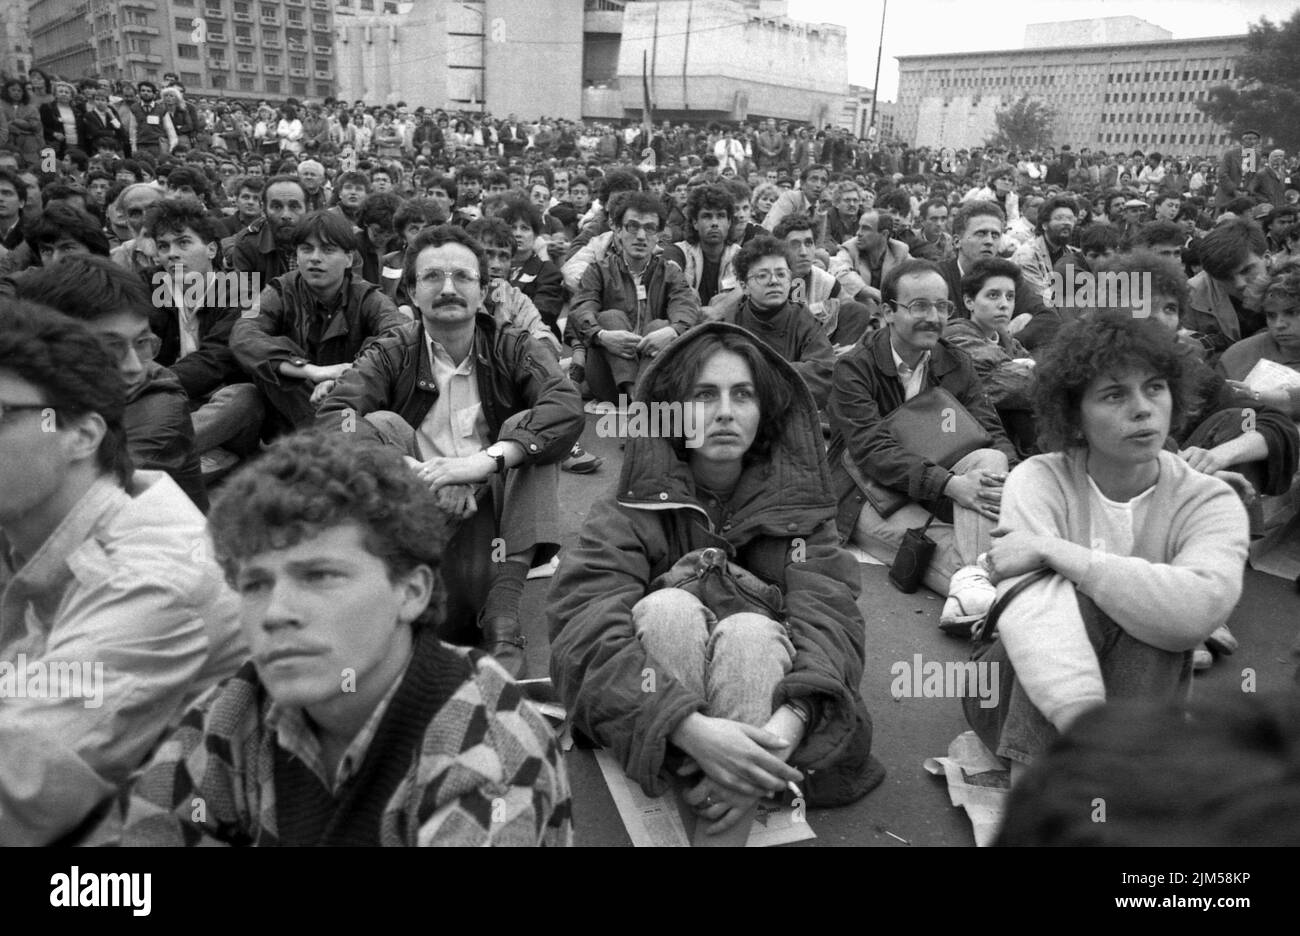 Bucharest, Romania, April 1990. 'Golaniada', a major anti-communism protest  in the University Square following the Romanian Revolution of 1989. People would gather daily to protest the ex-communists that took the power after the Revolution. The main demand was that no former party member would be allowed to run in the elections of May 20th. Stock Photo